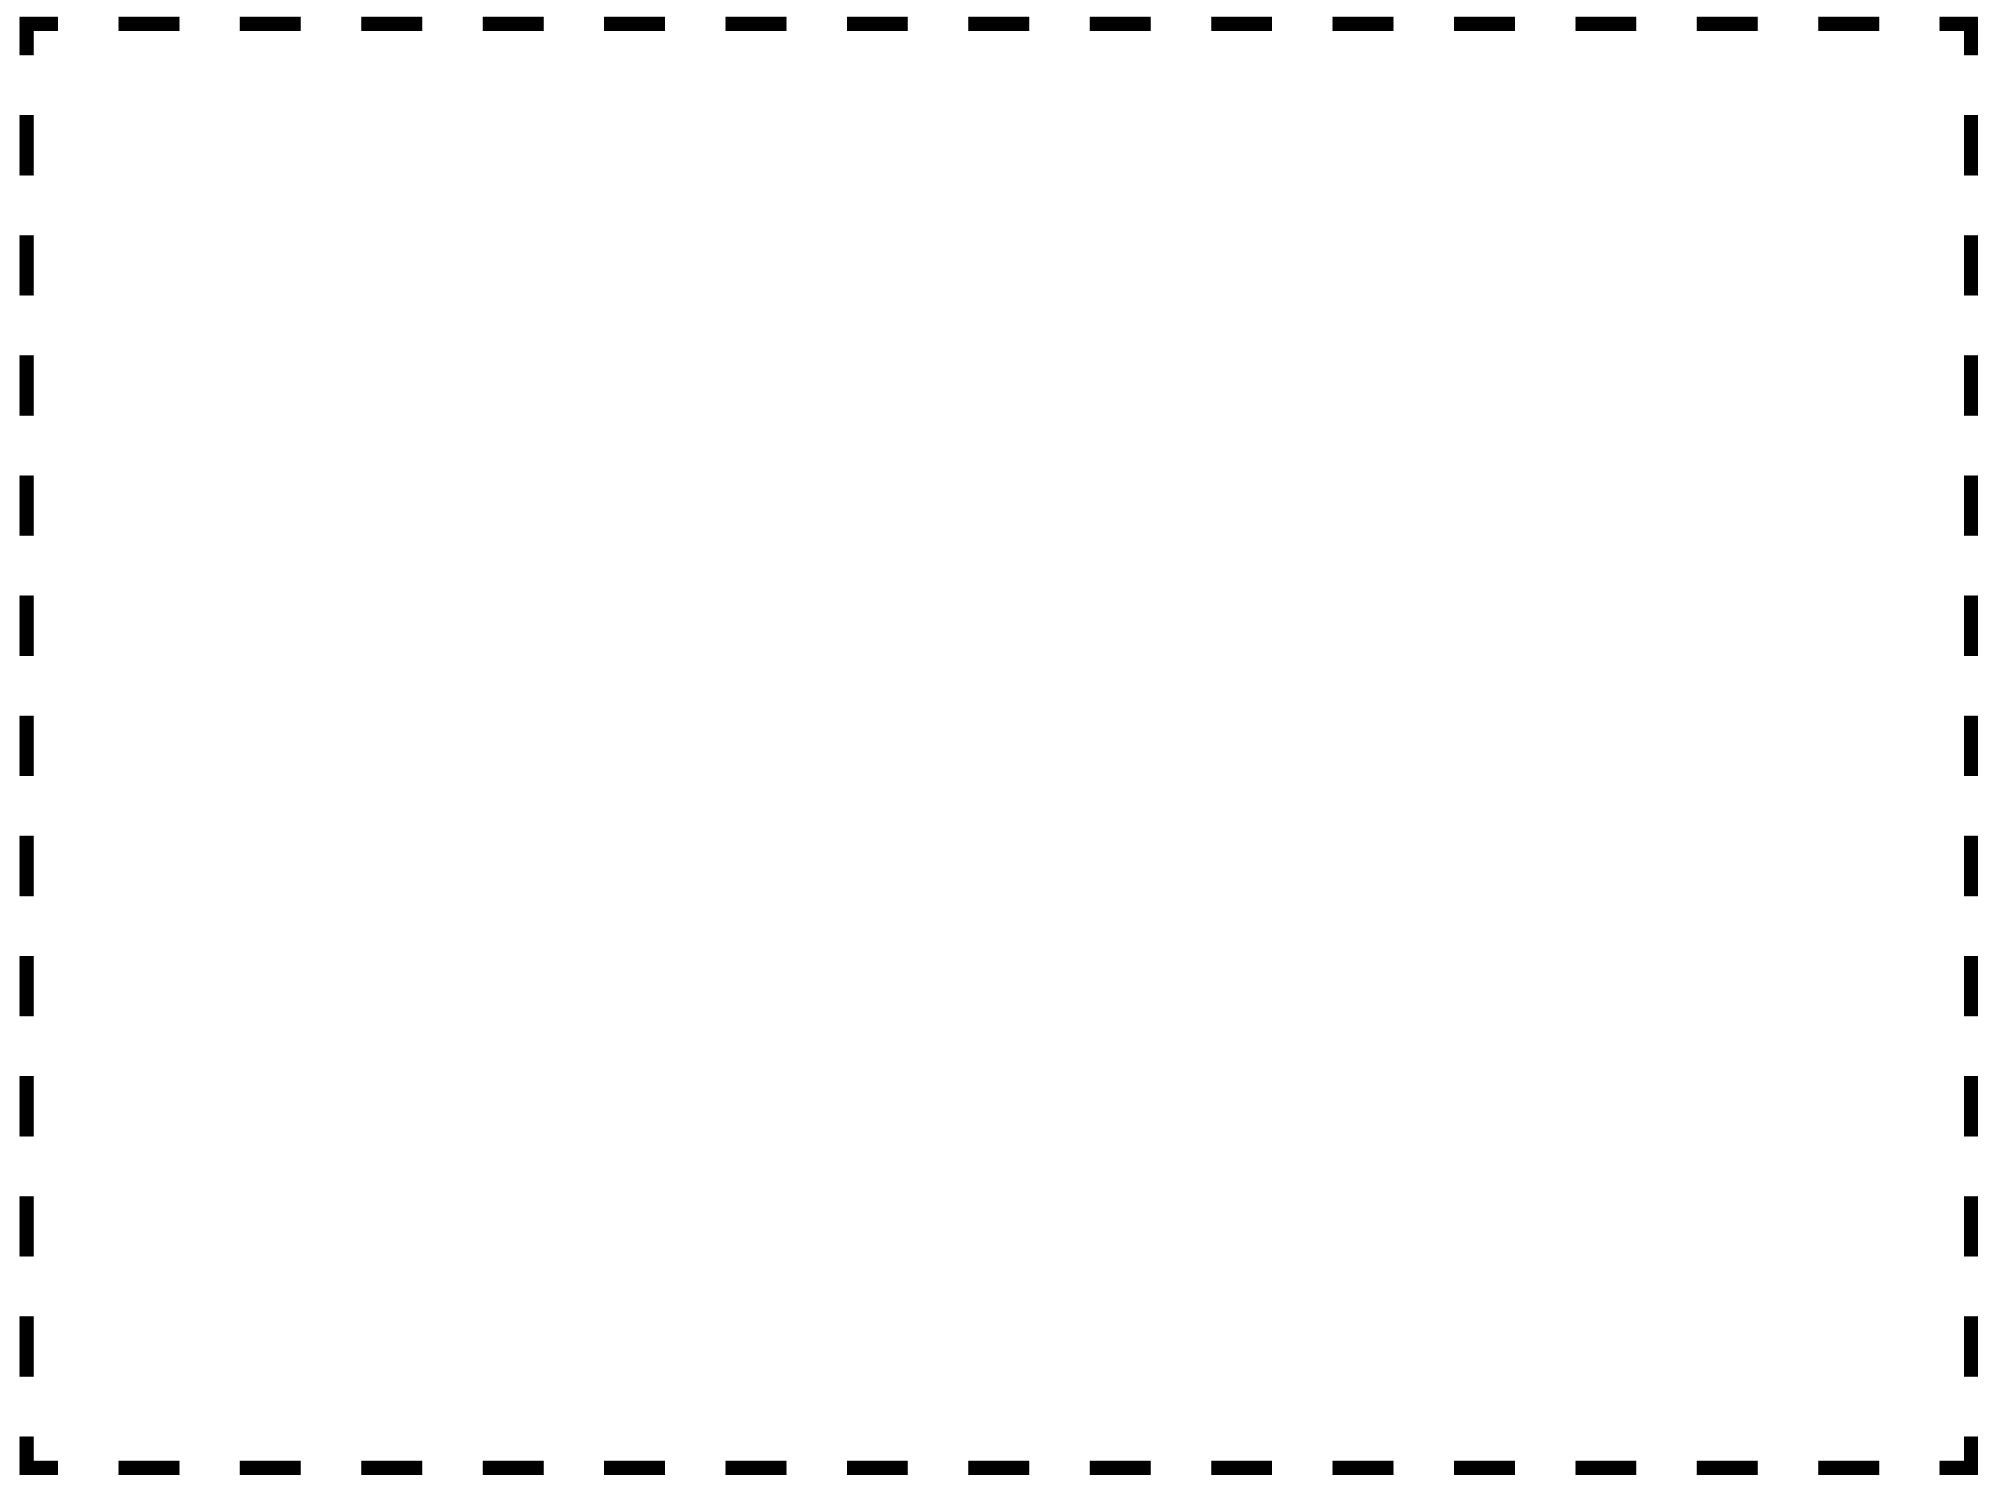 625-1937-coupon-outline-4x3-k.png